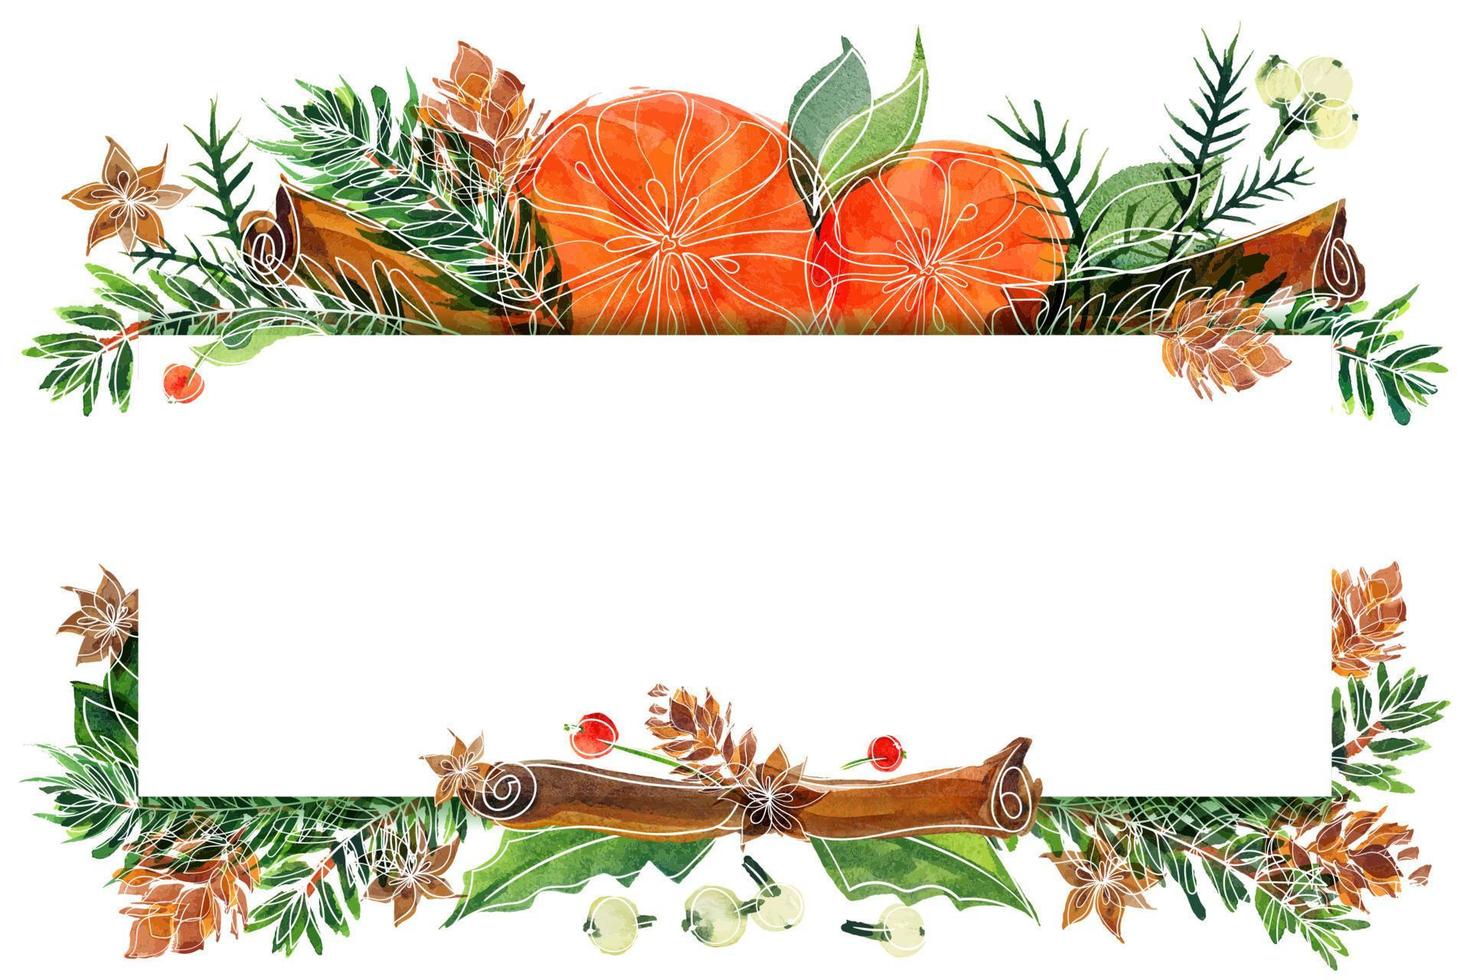 Christmas watercolor oranges and winter plants card vector